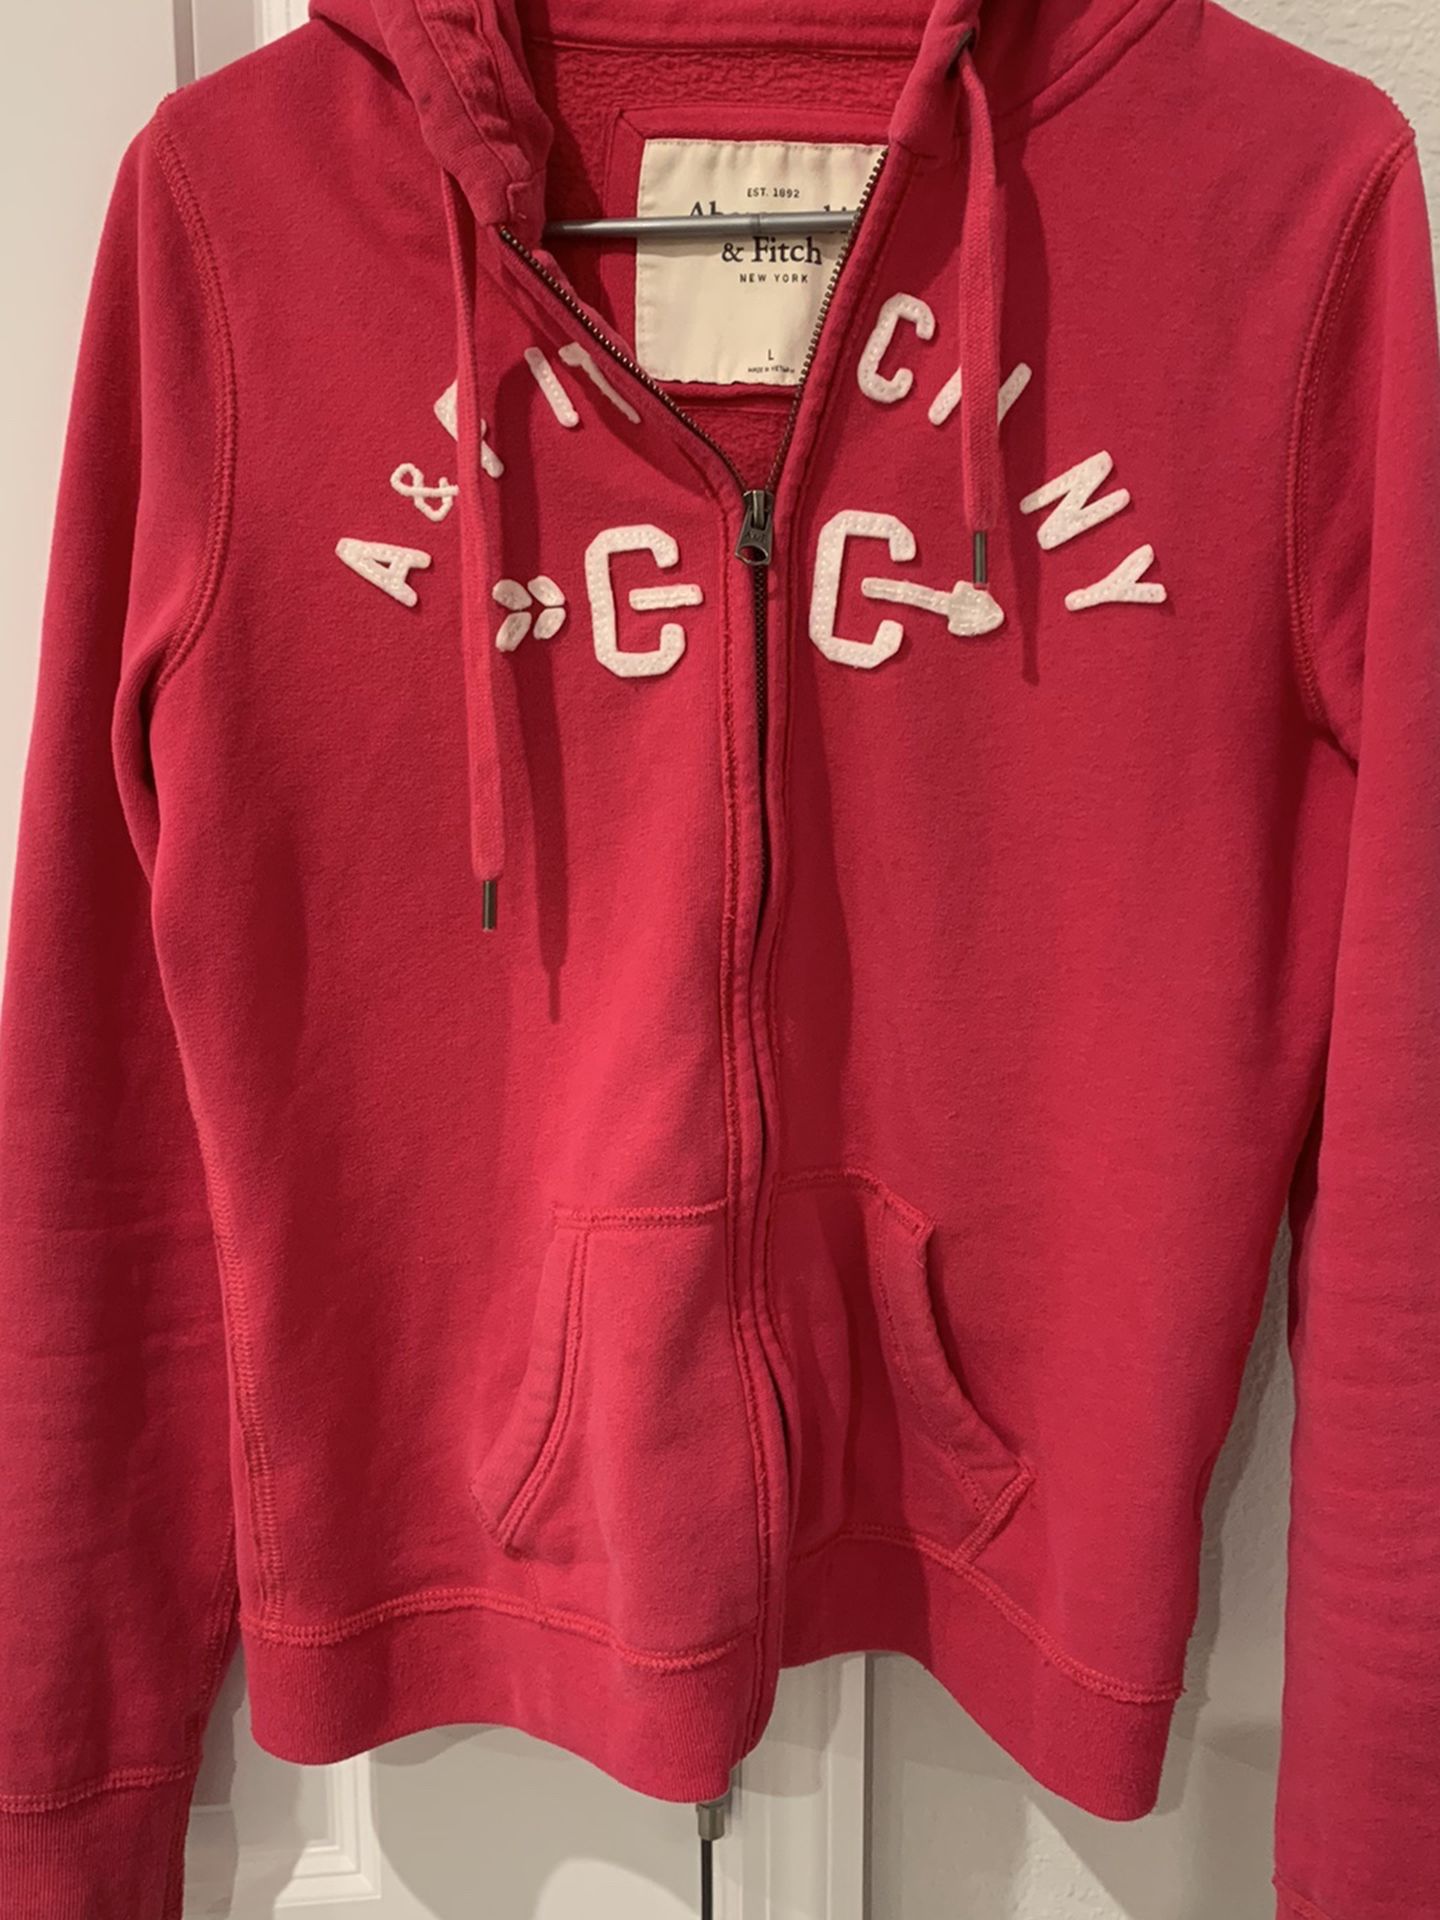 Abercrombie&Fitch hoodie